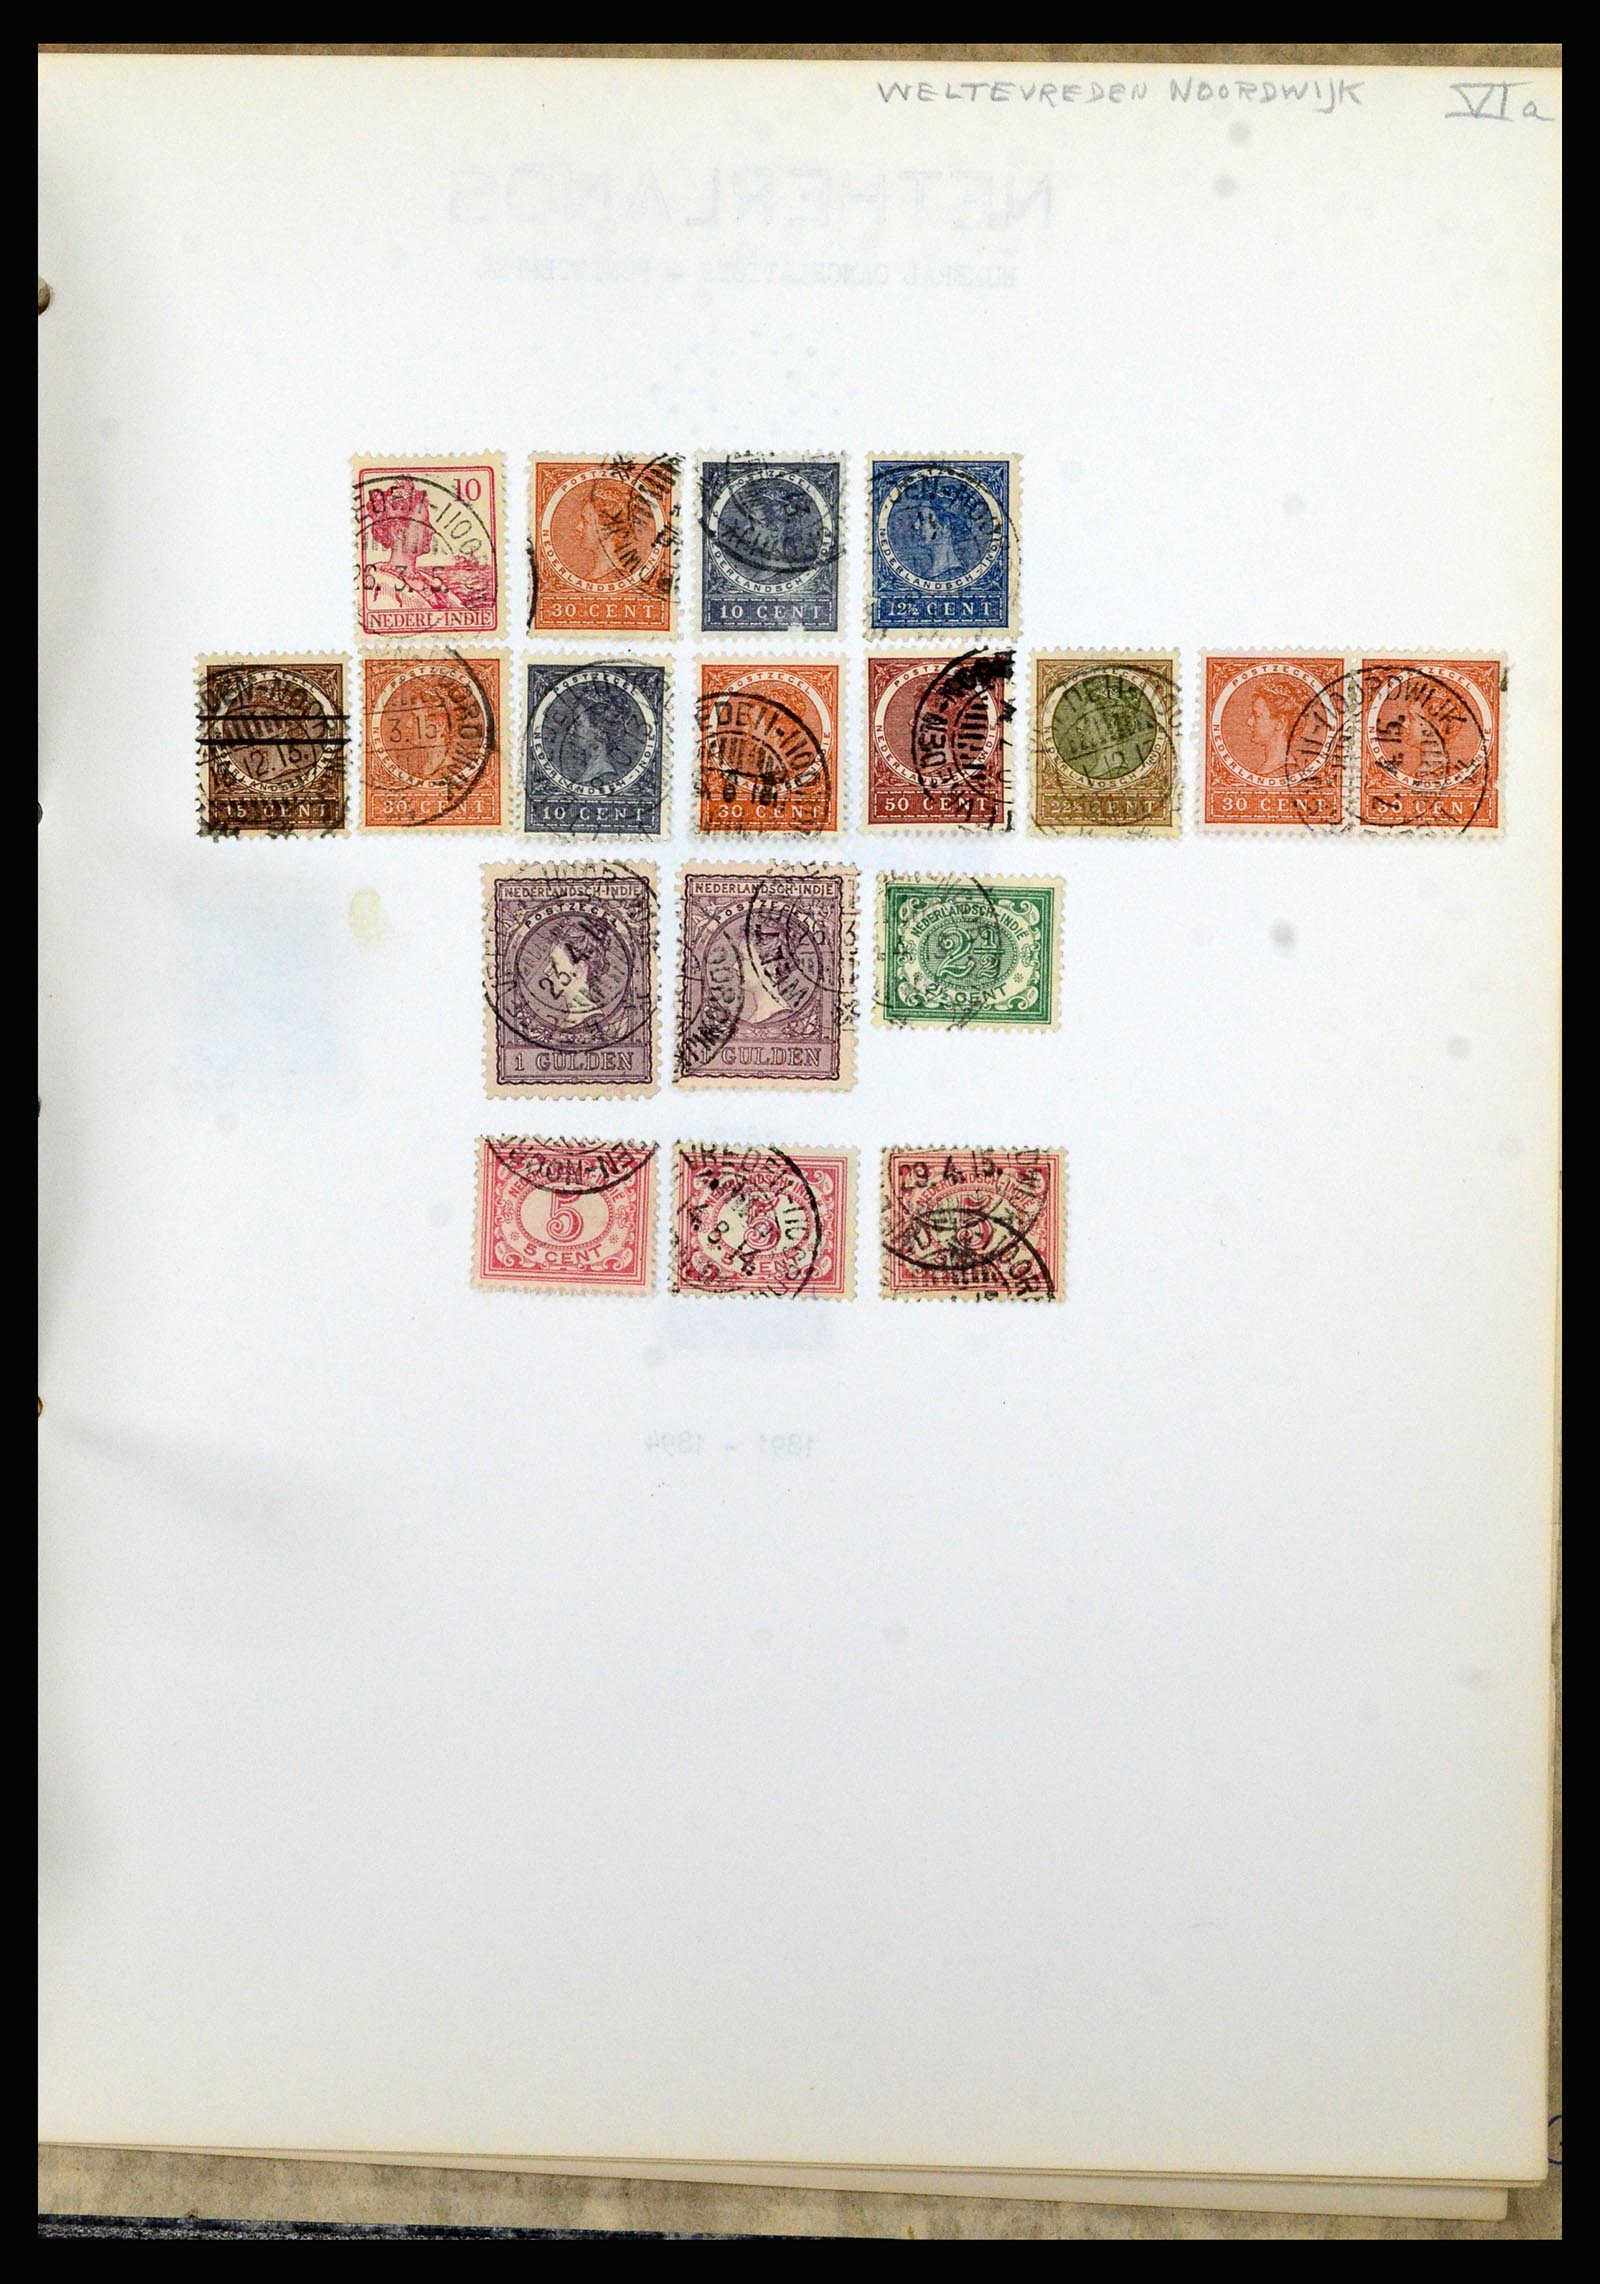 36841 192 - Stamp collection 36841 Dutch east Indies short bar cancels.